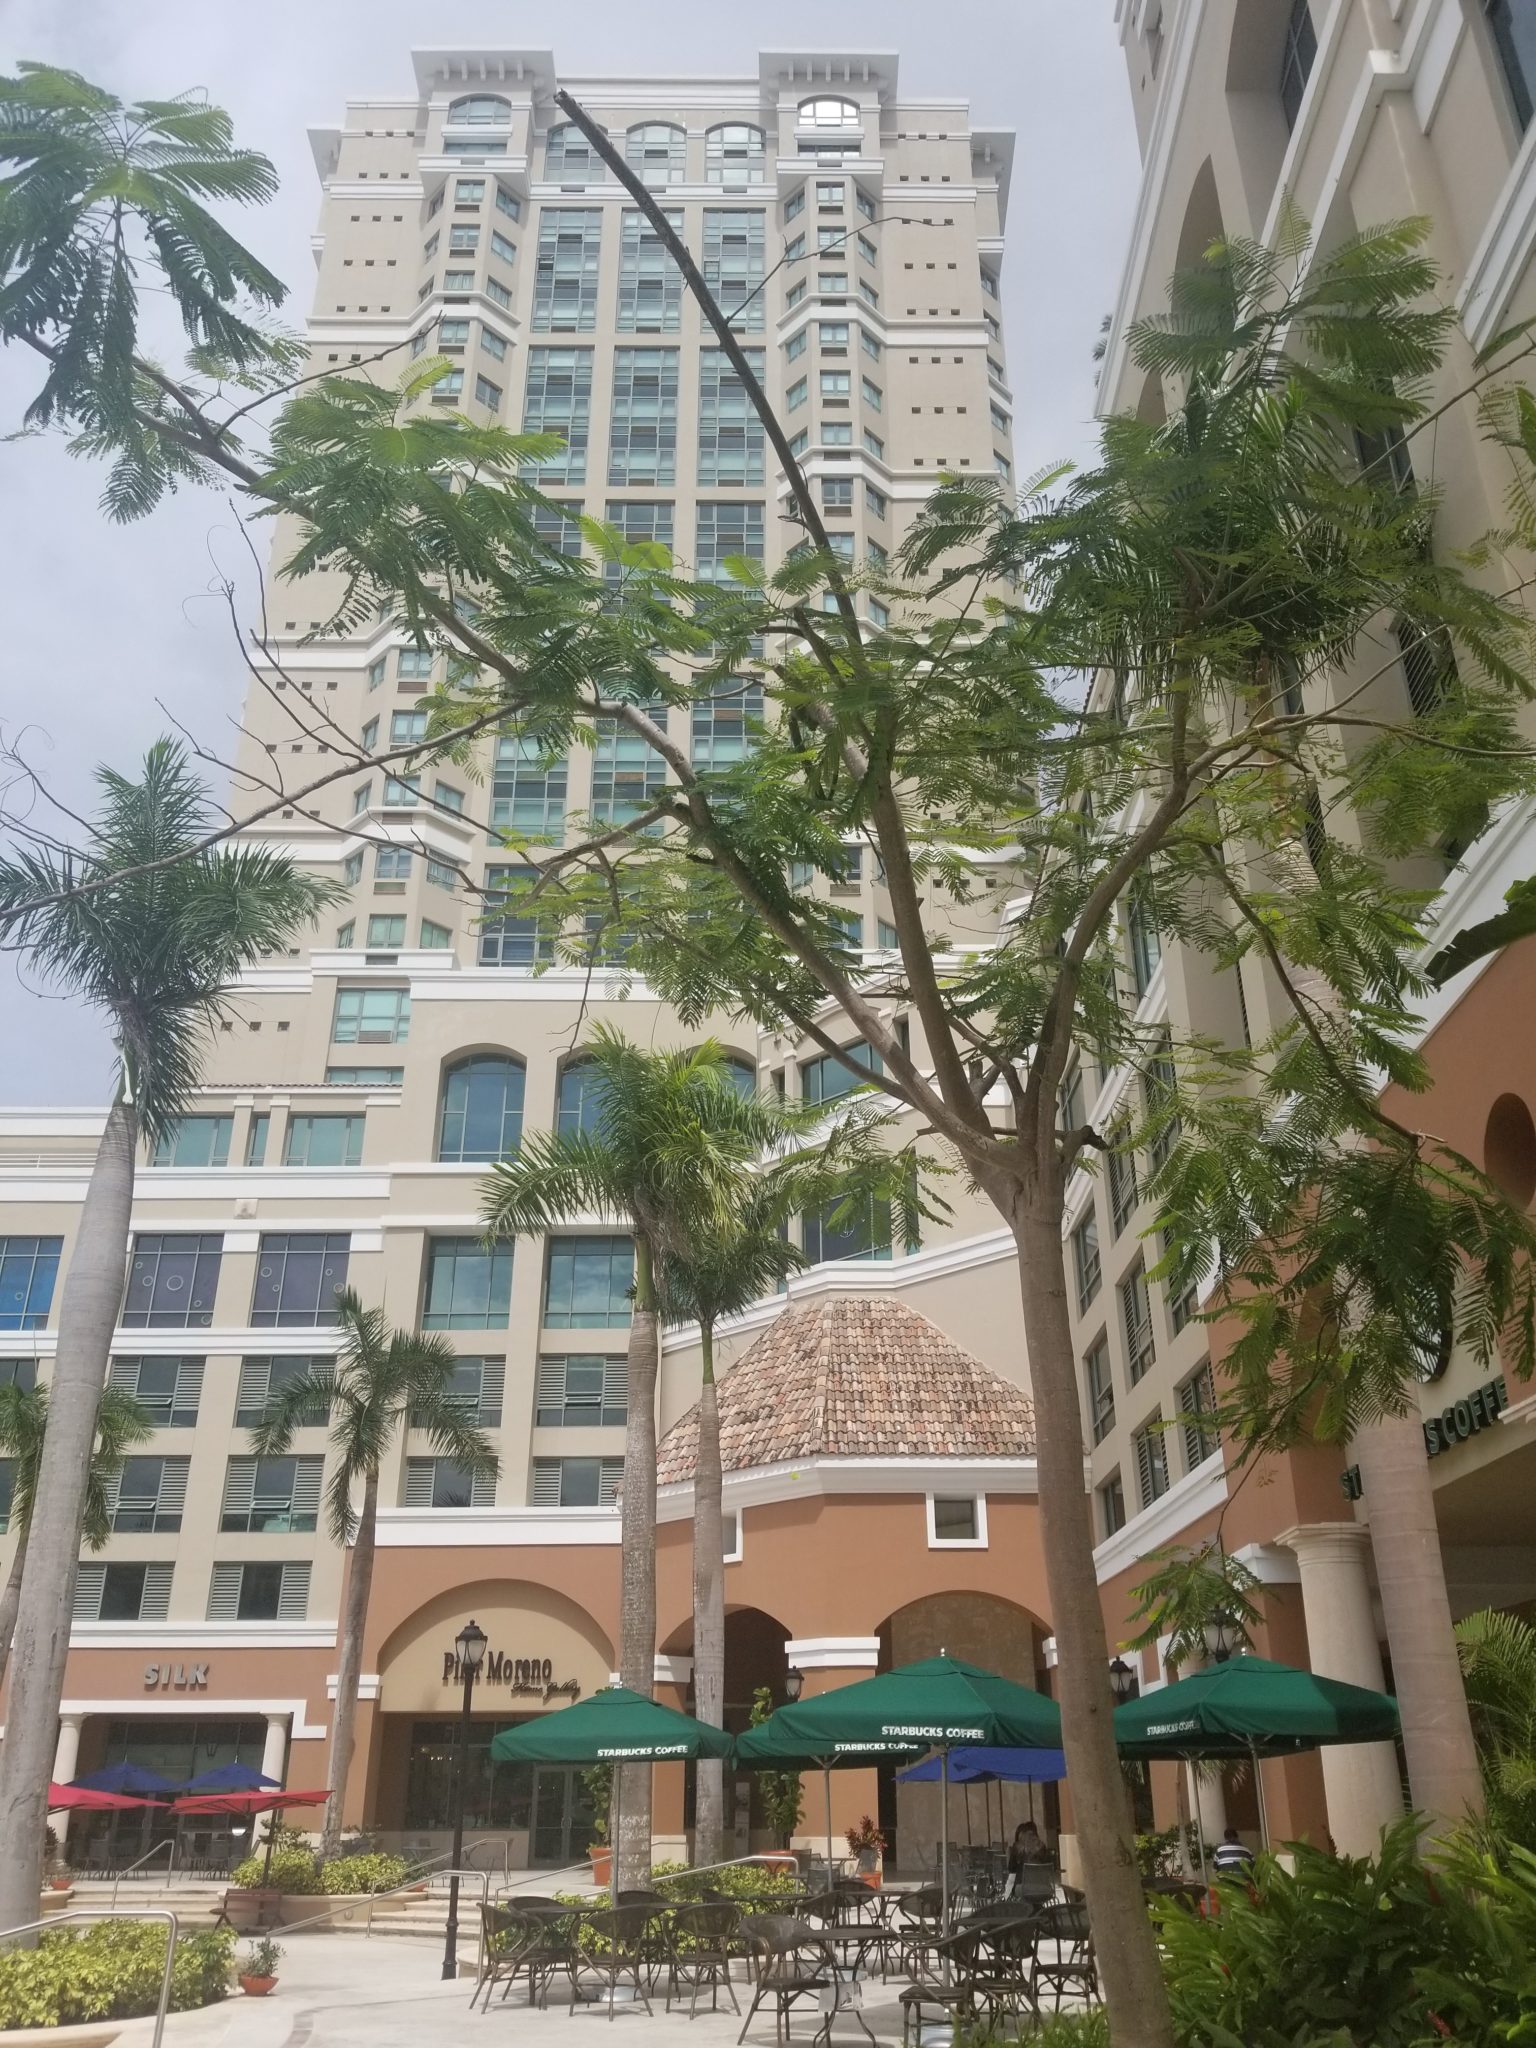 a tall building with trees and umbrellas